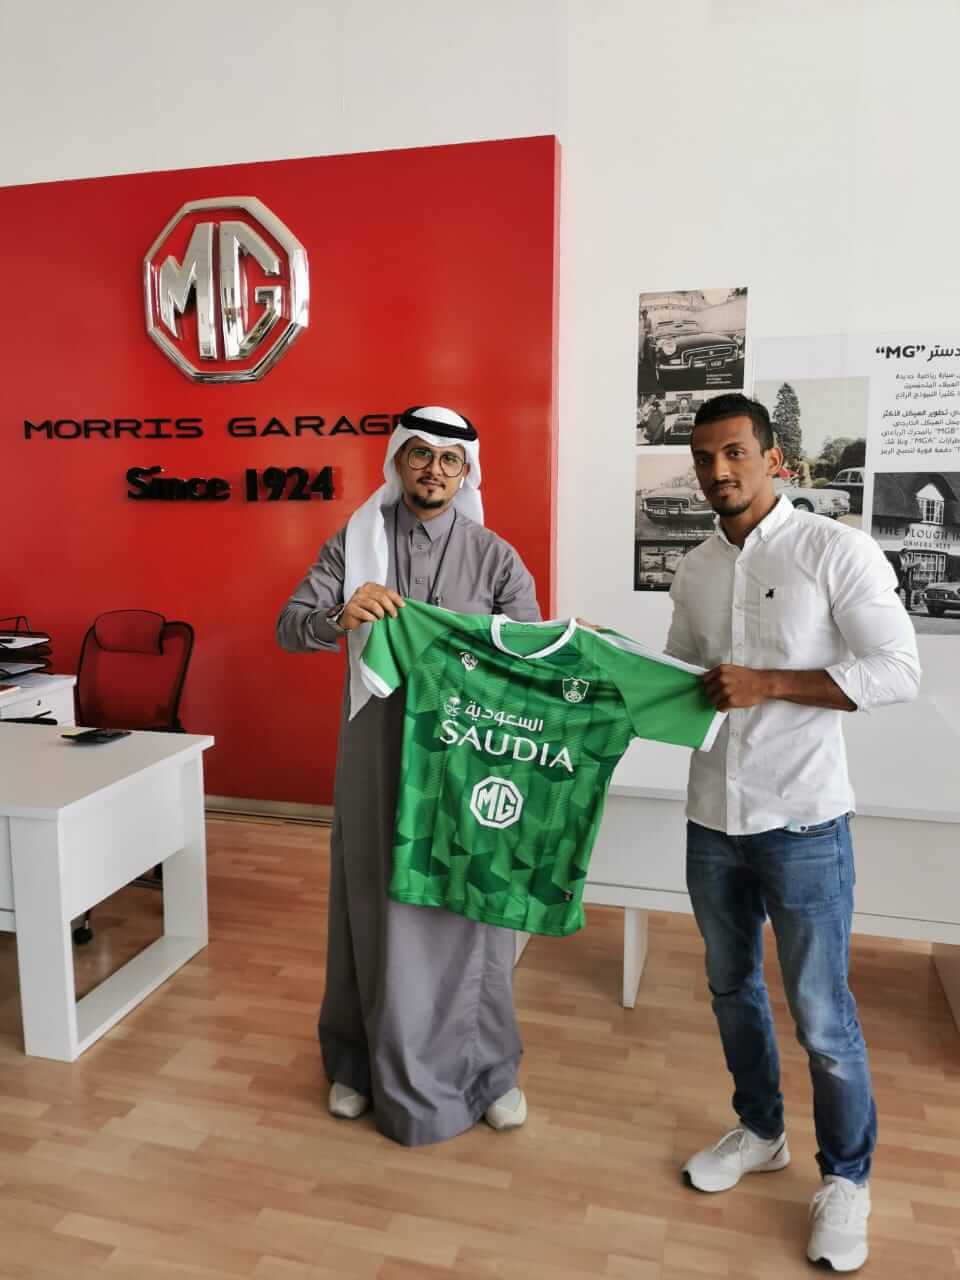 MG continues to support the Saudi National Club championships